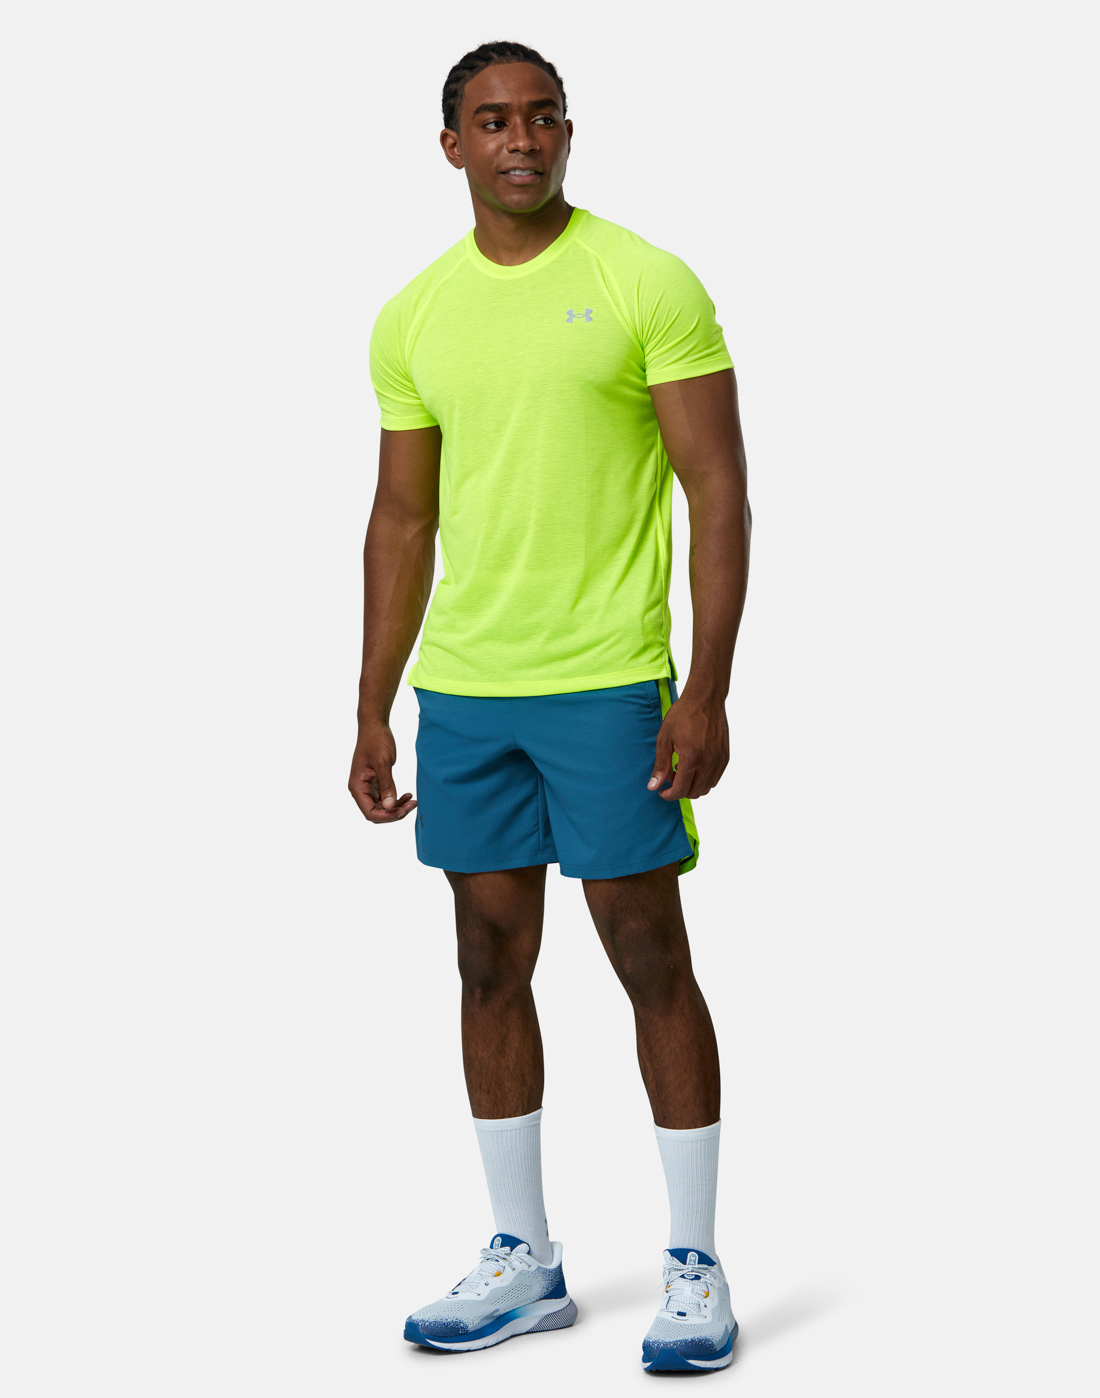 Under Armour Mens Streaker T-Shirt - Green | Life Style Sports IE